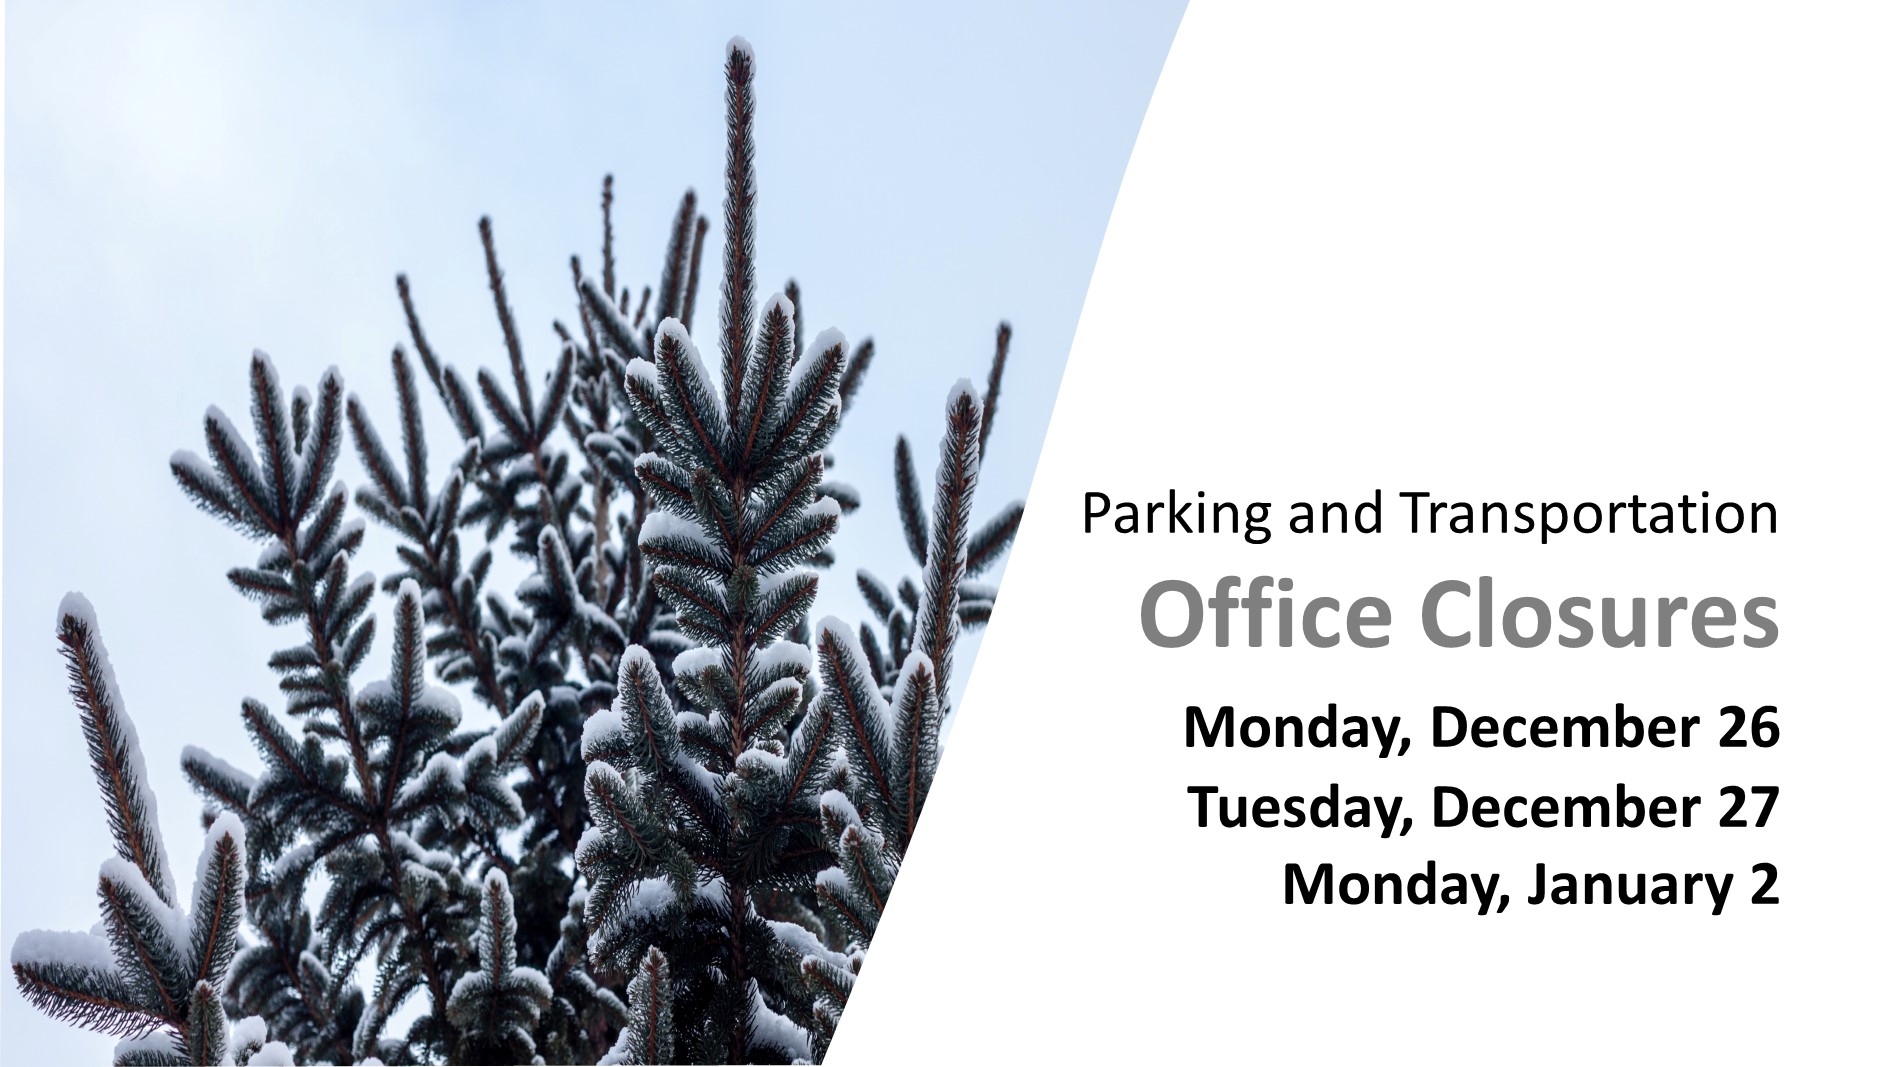 Parking and Transportation offices closed: December 26, December 27, and January 2